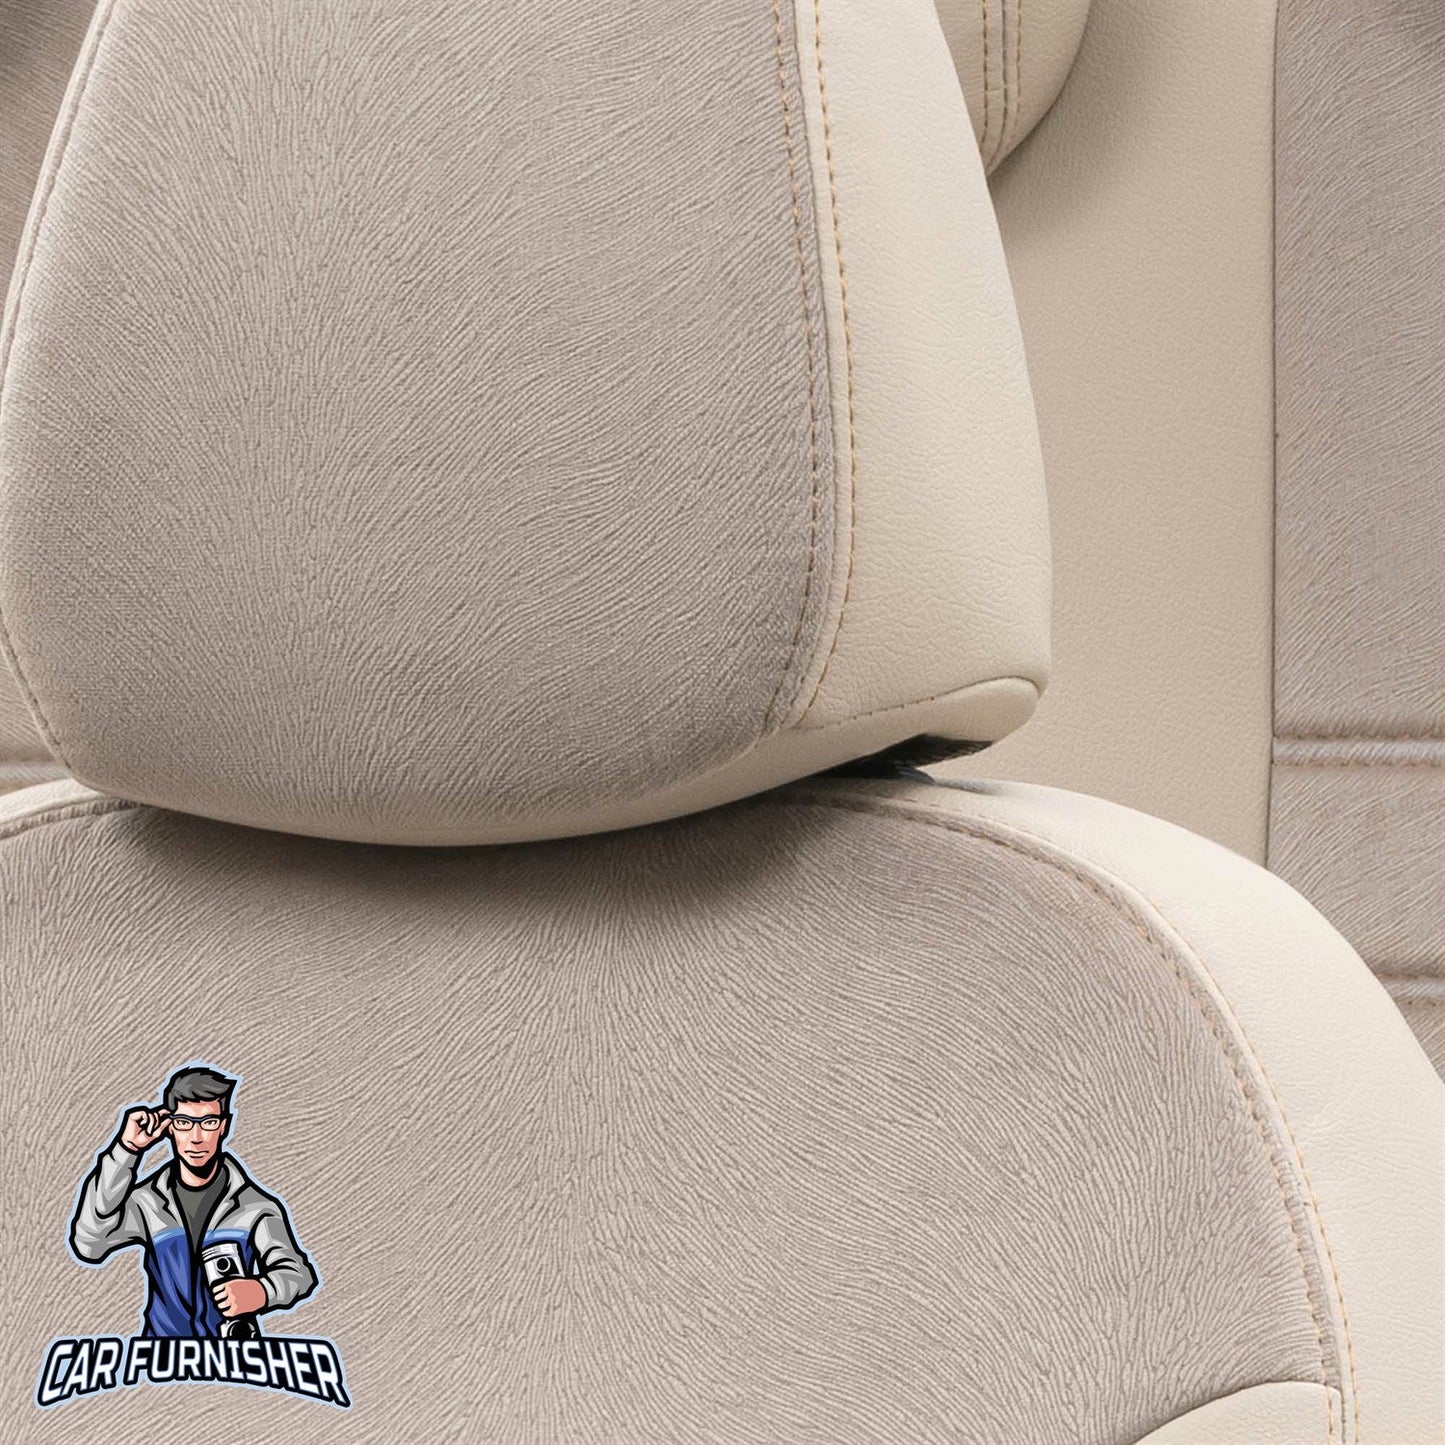 Toyota Avensis Seat Cover London Foal Feather Design Beige Leather & Foal Feather